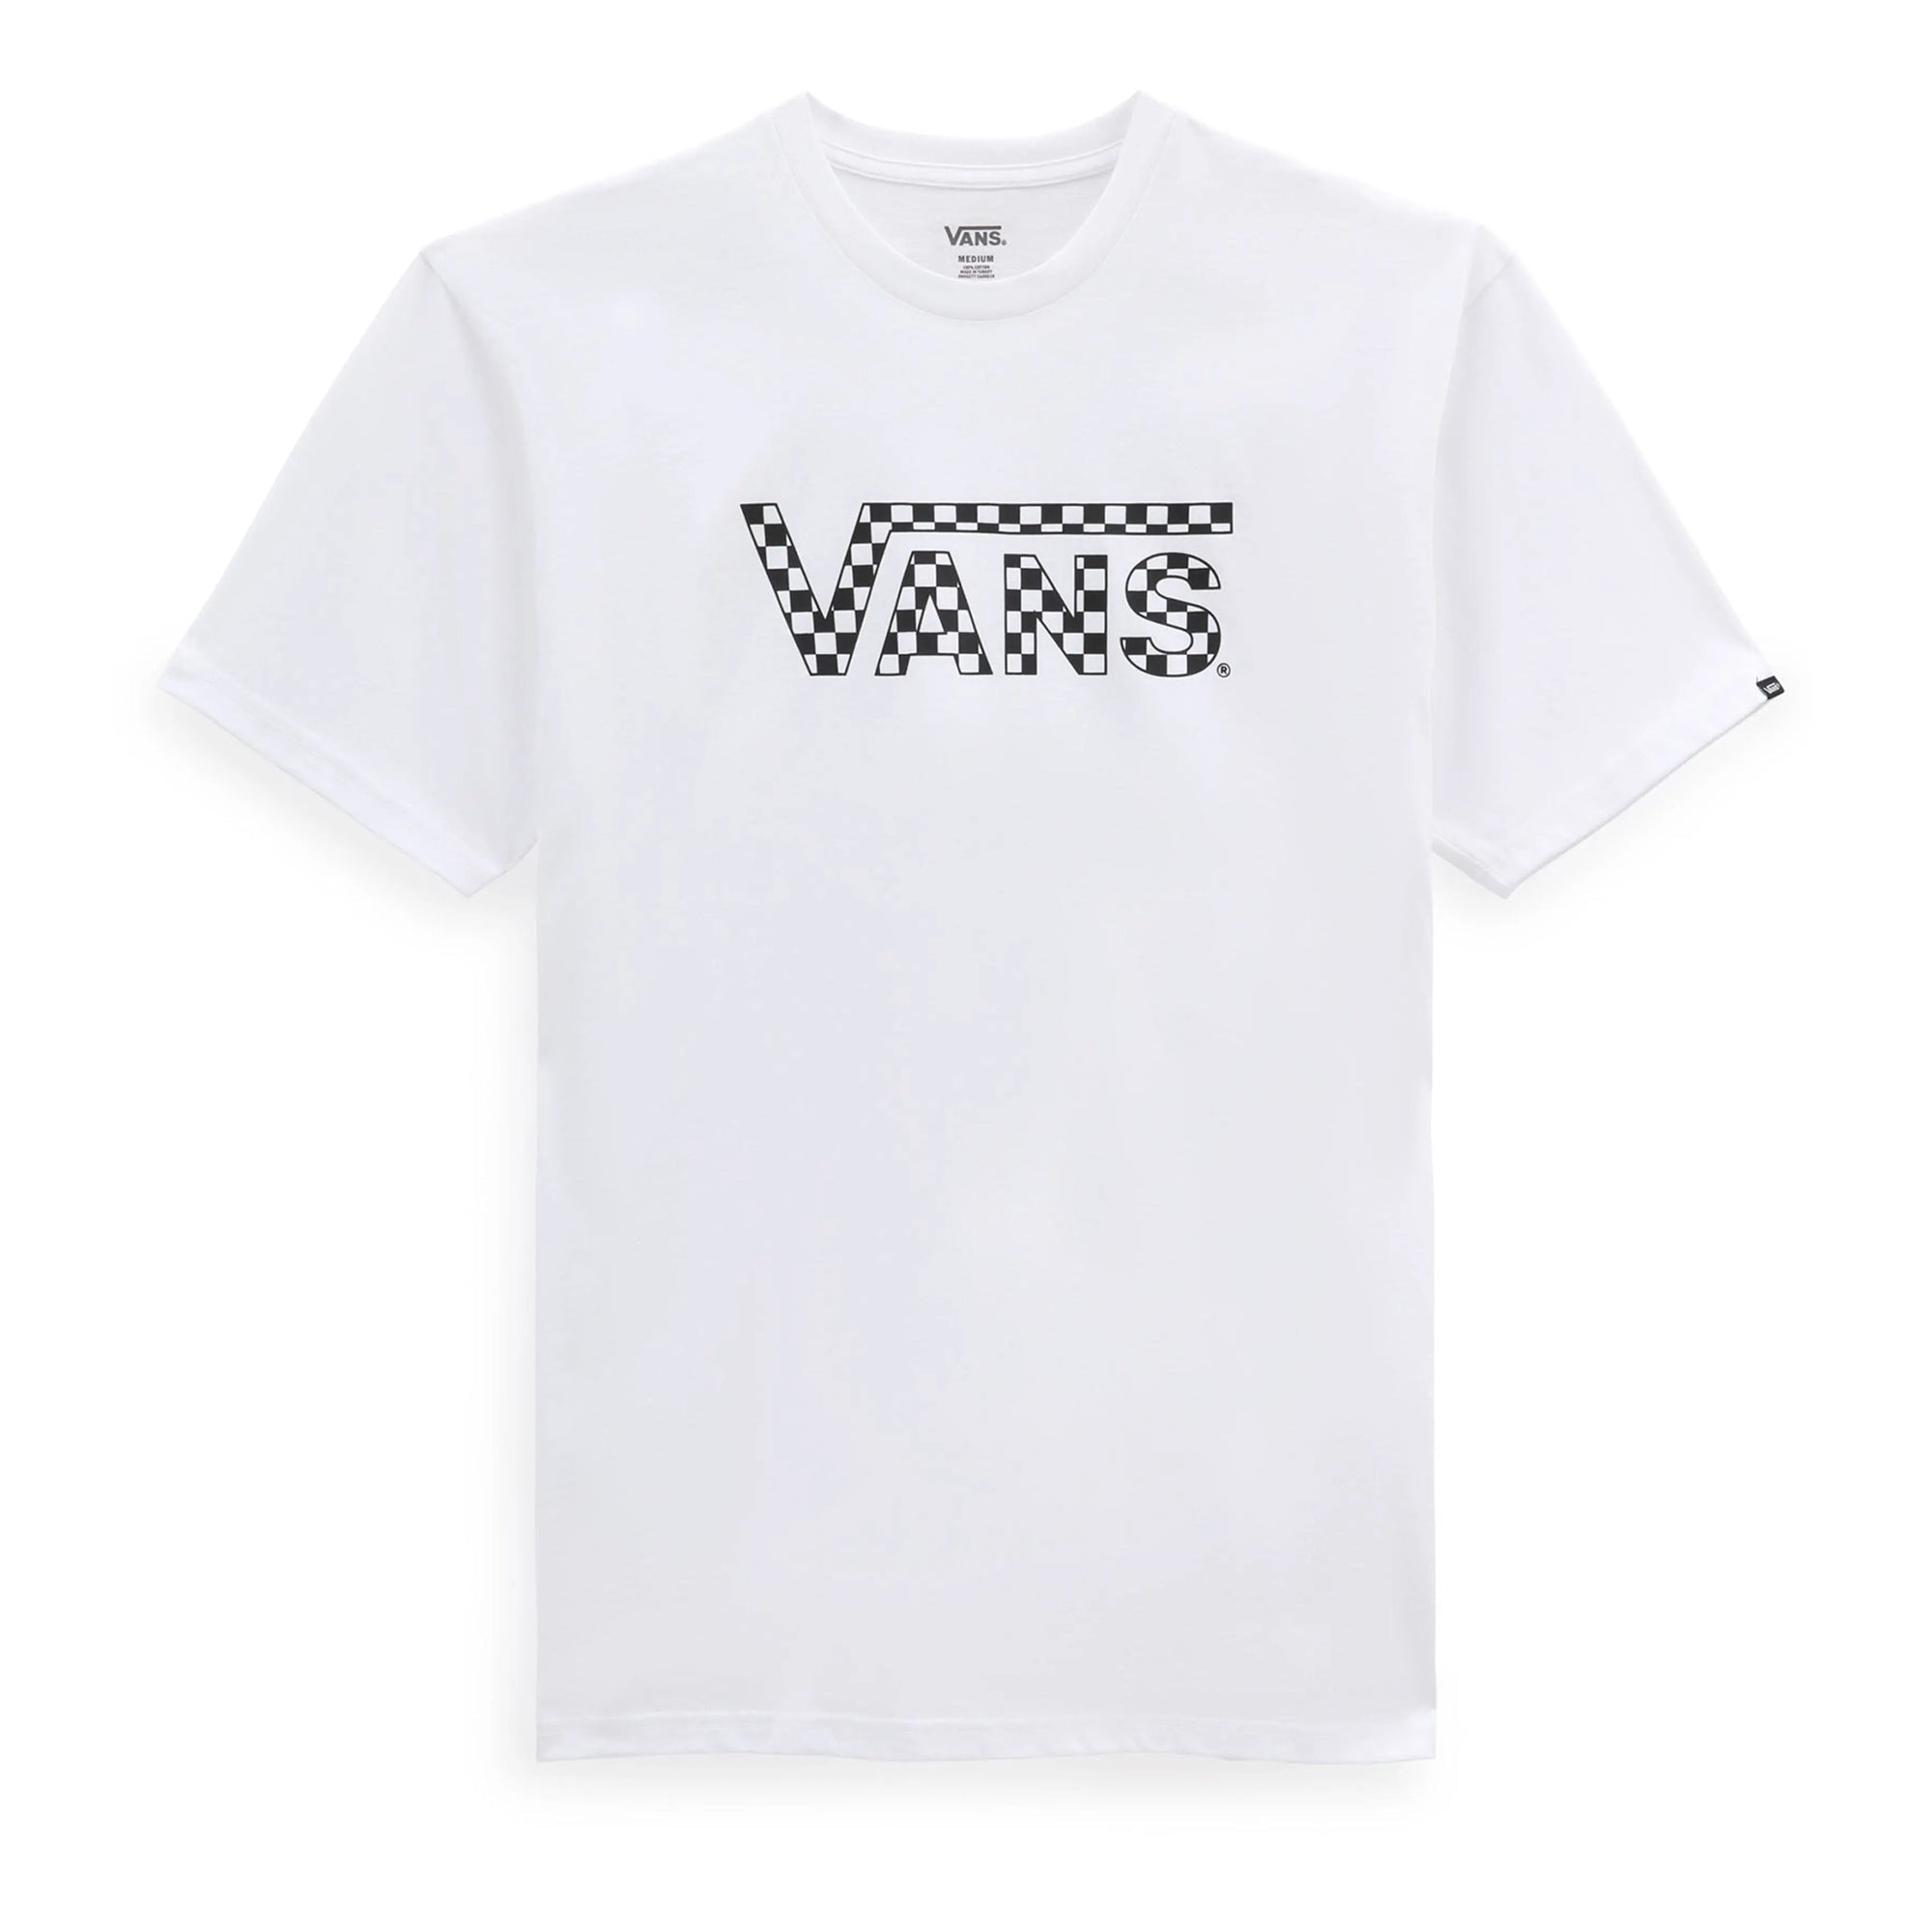 Vans Vans Mens Checkered Vans T-Shirt Vn0a7ucpyb21aw23 White Clothing XS ADULT / White,SMALL ADULT / White,MEDIUM ADULT / White